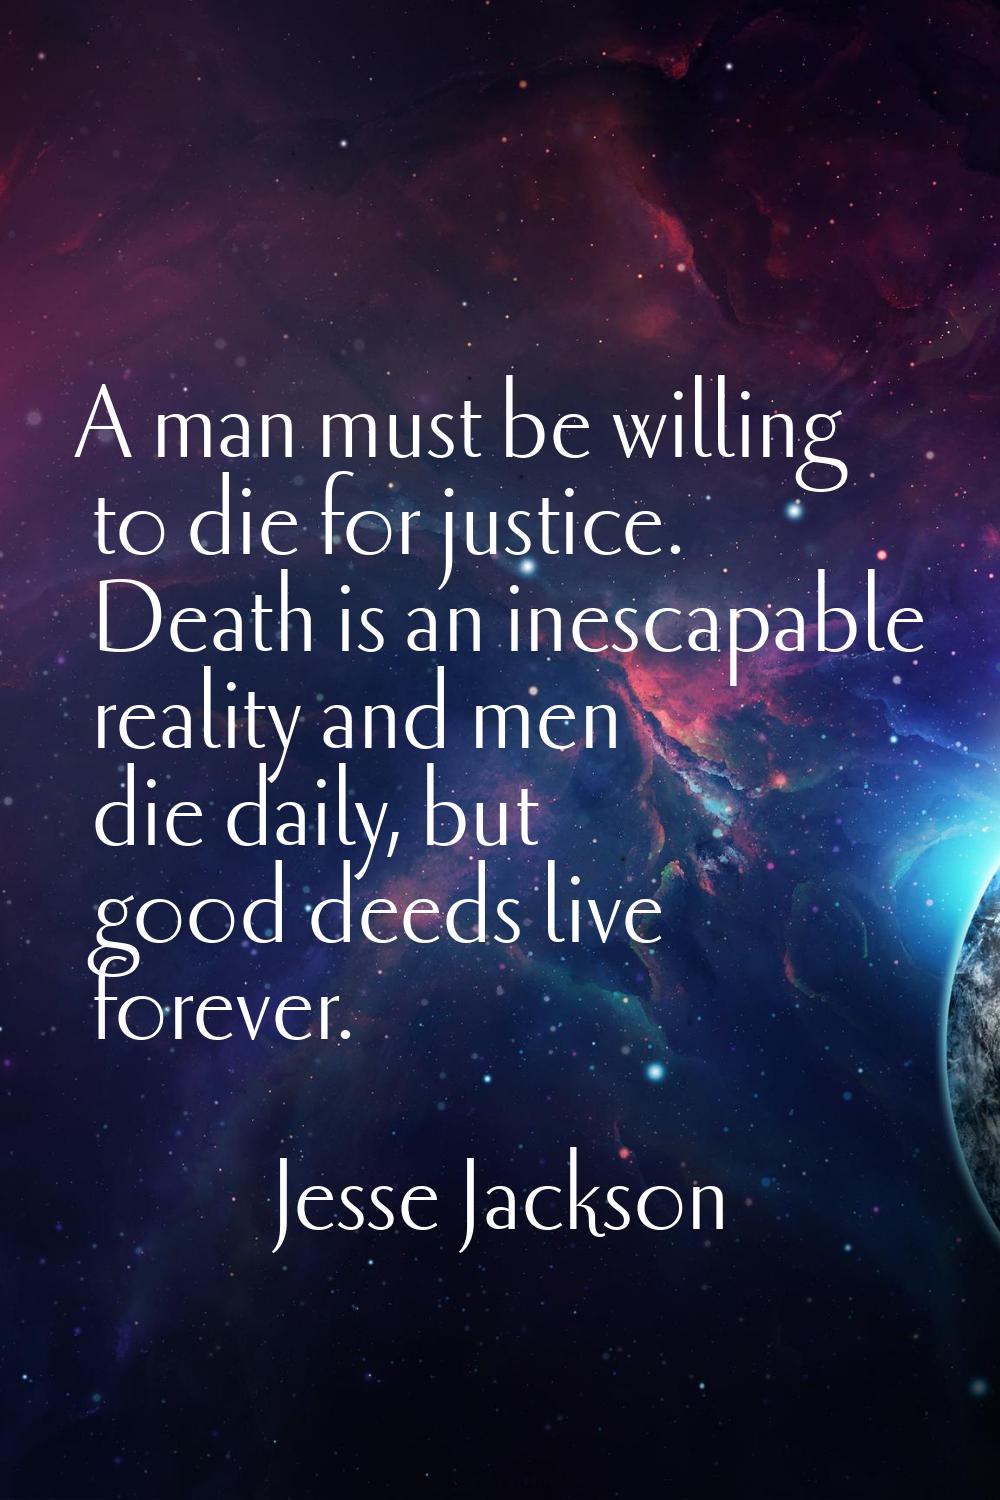 A man must be willing to die for justice. Death is an inescapable reality and men die daily, but go